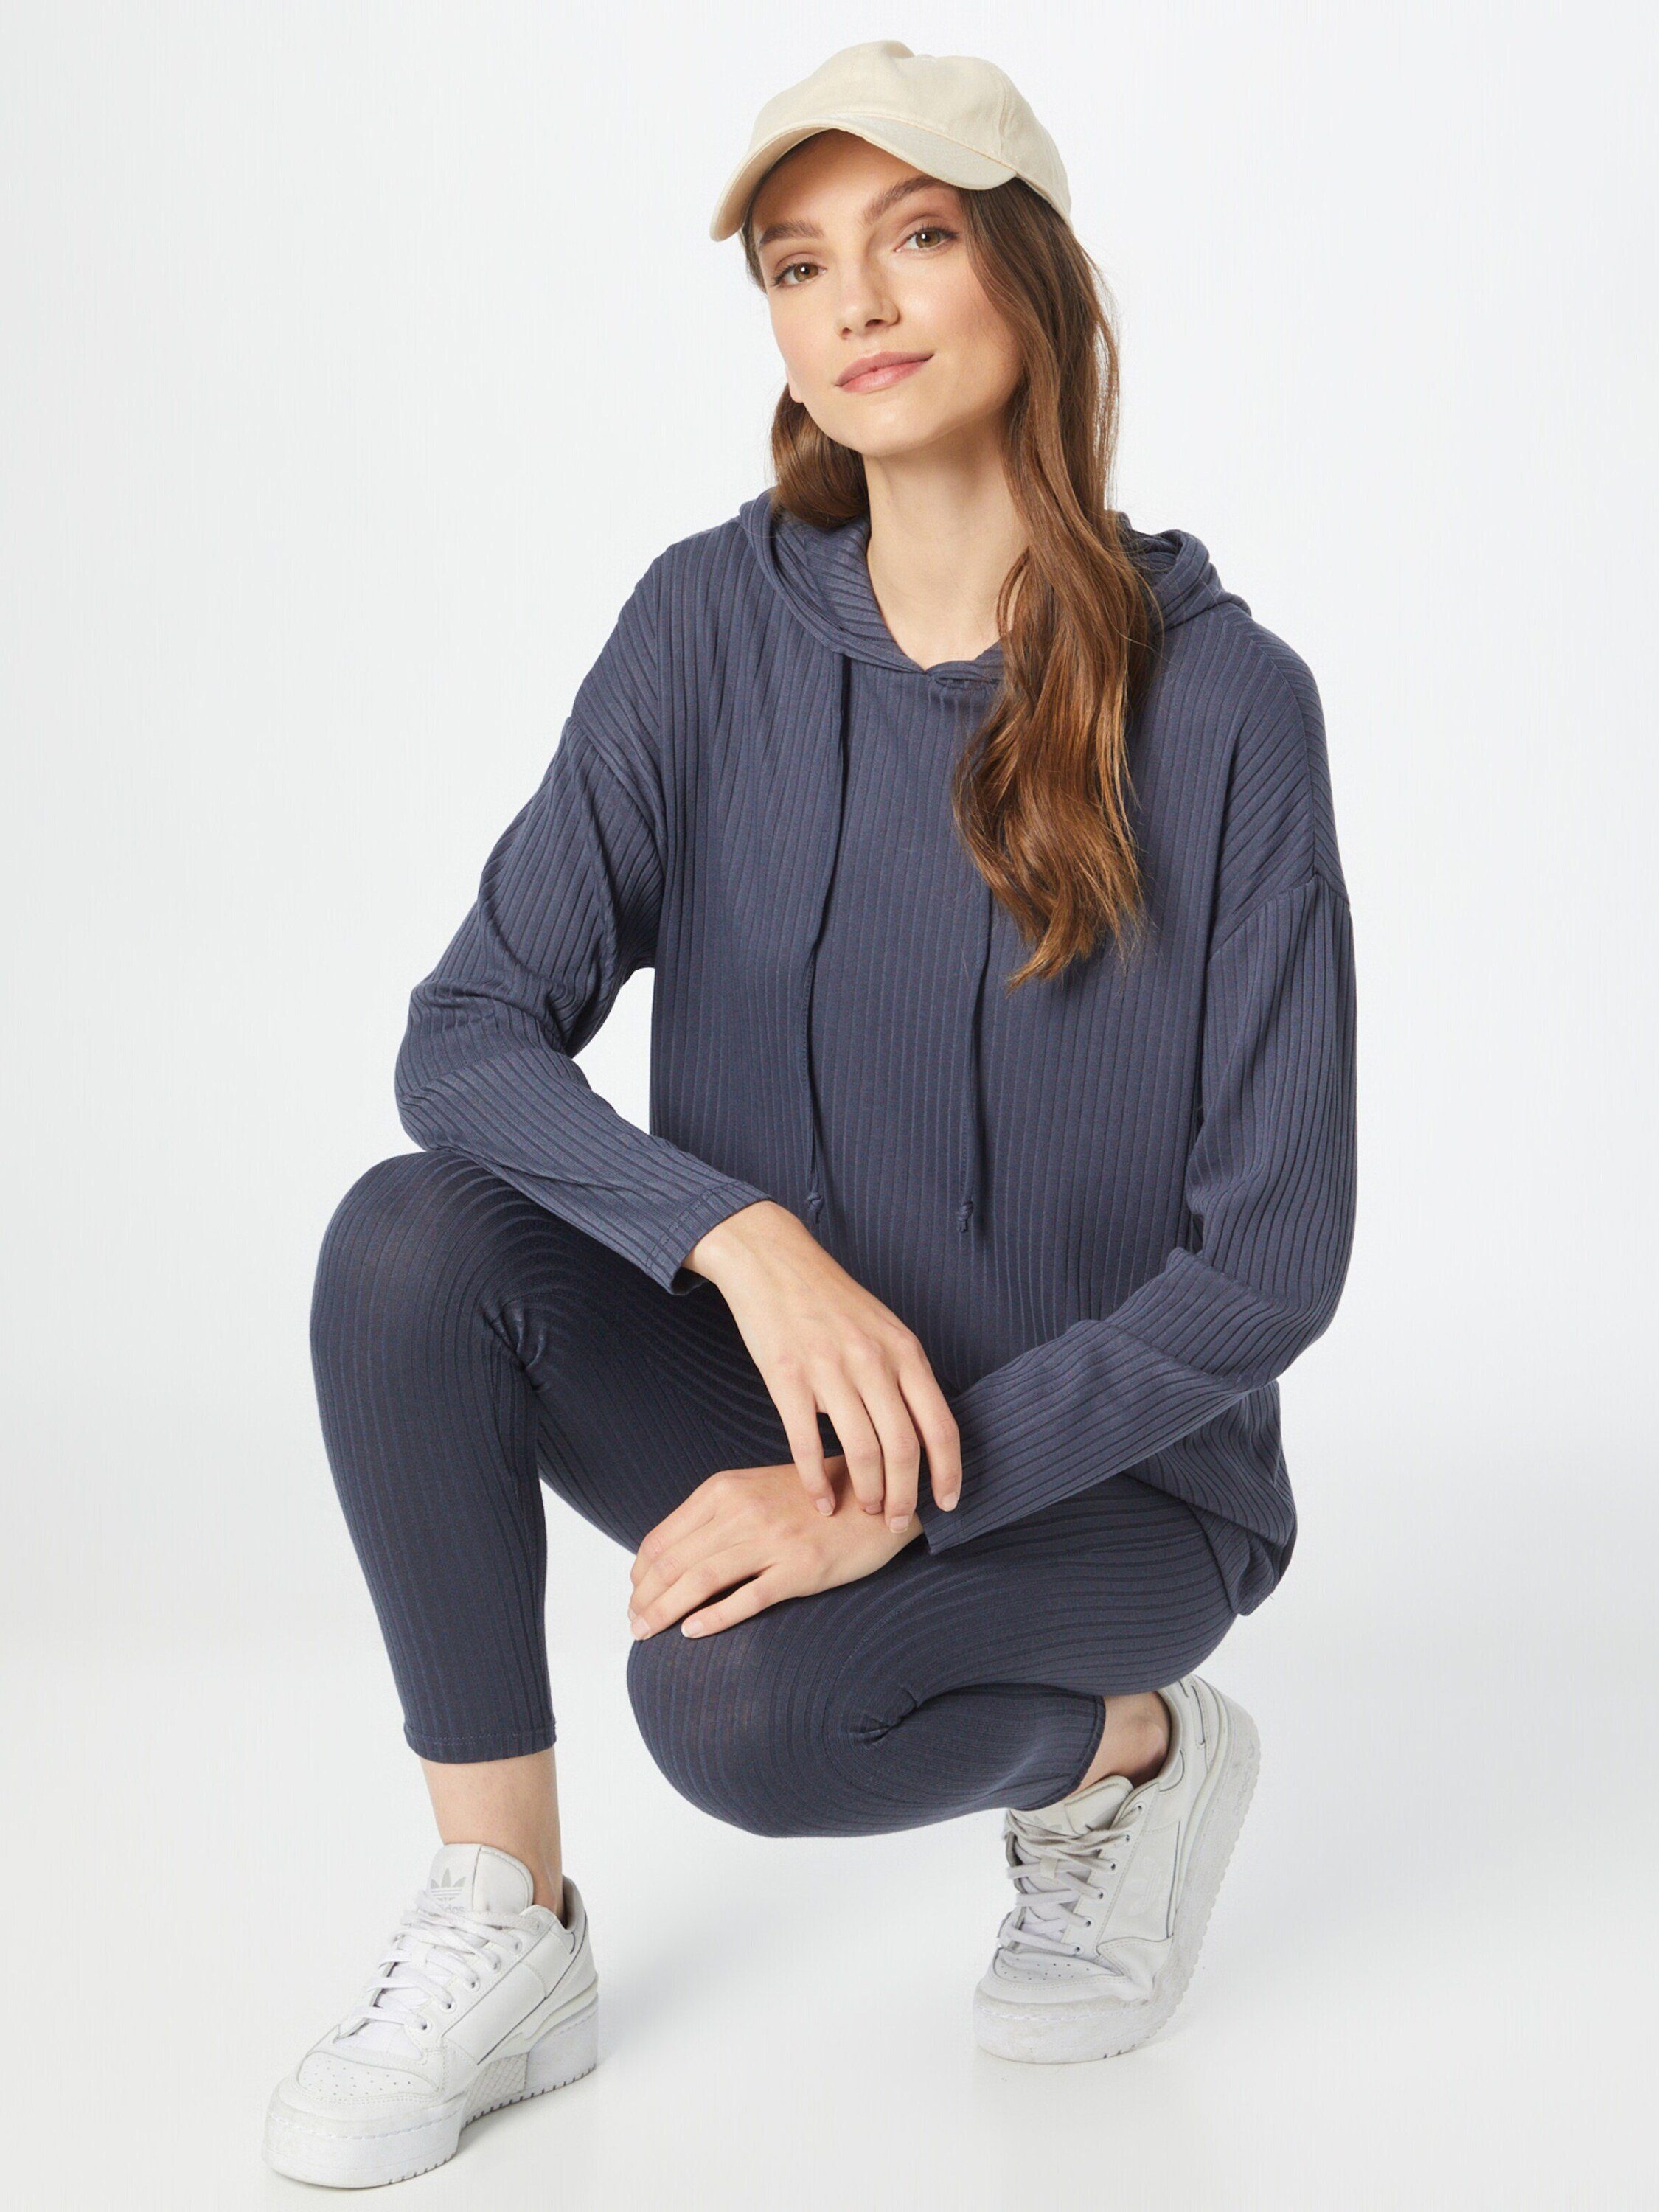 Plain/ohne (1-tlg) Molly Details pieces Strickpullover